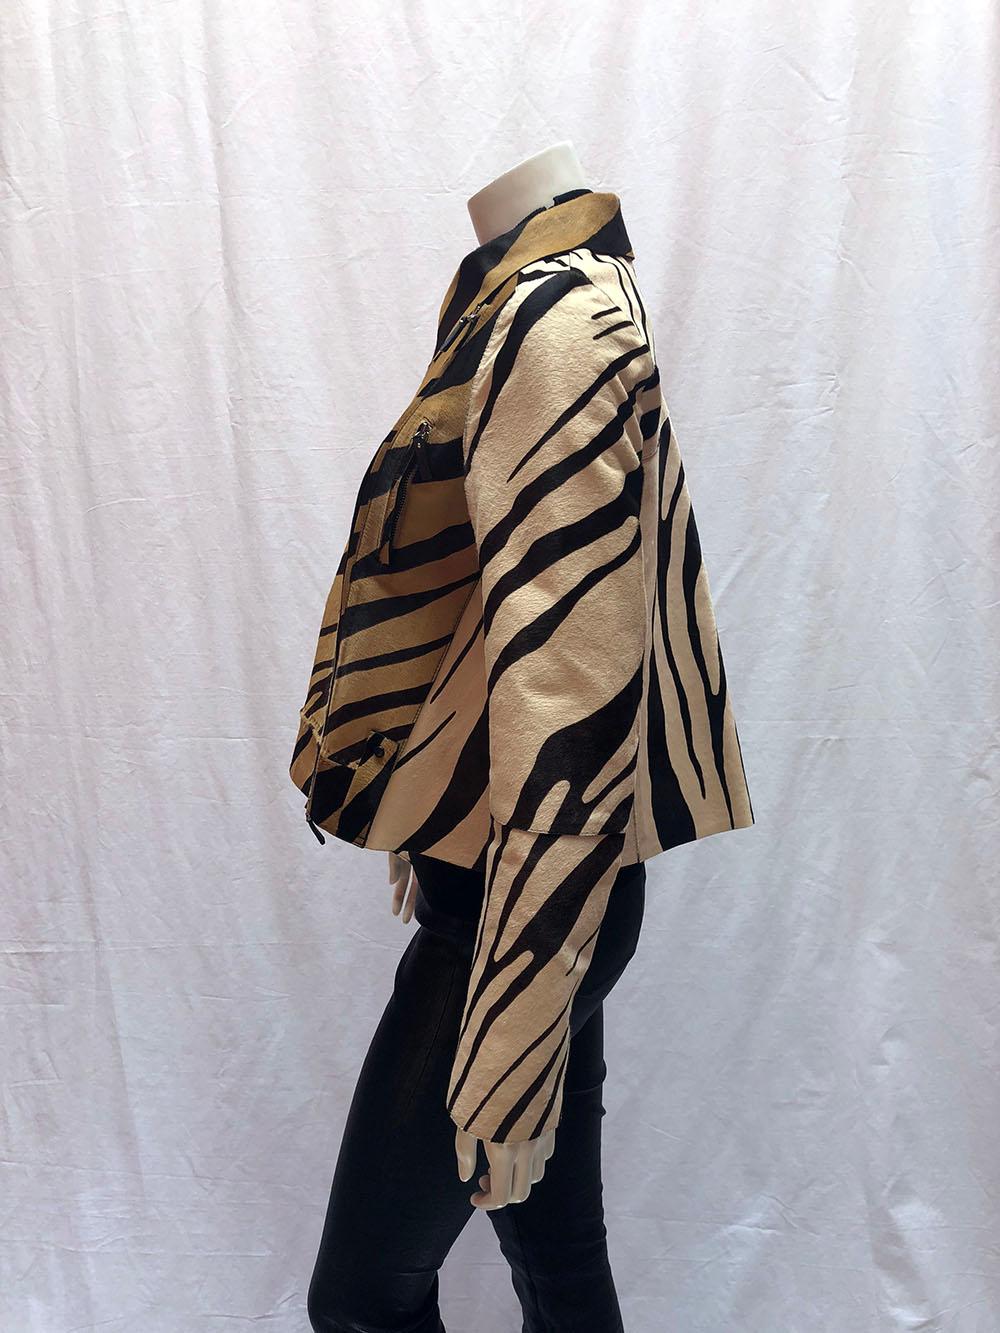 Giraffe print pony hair, moto-style swing jacket by Roberto Cavalli with black leather lining. 

Colors: camel, black, brown, and cream. Asymmetrical side zip with front snap closure pocket. Dual chest zippered pockets. Gathered backside with a